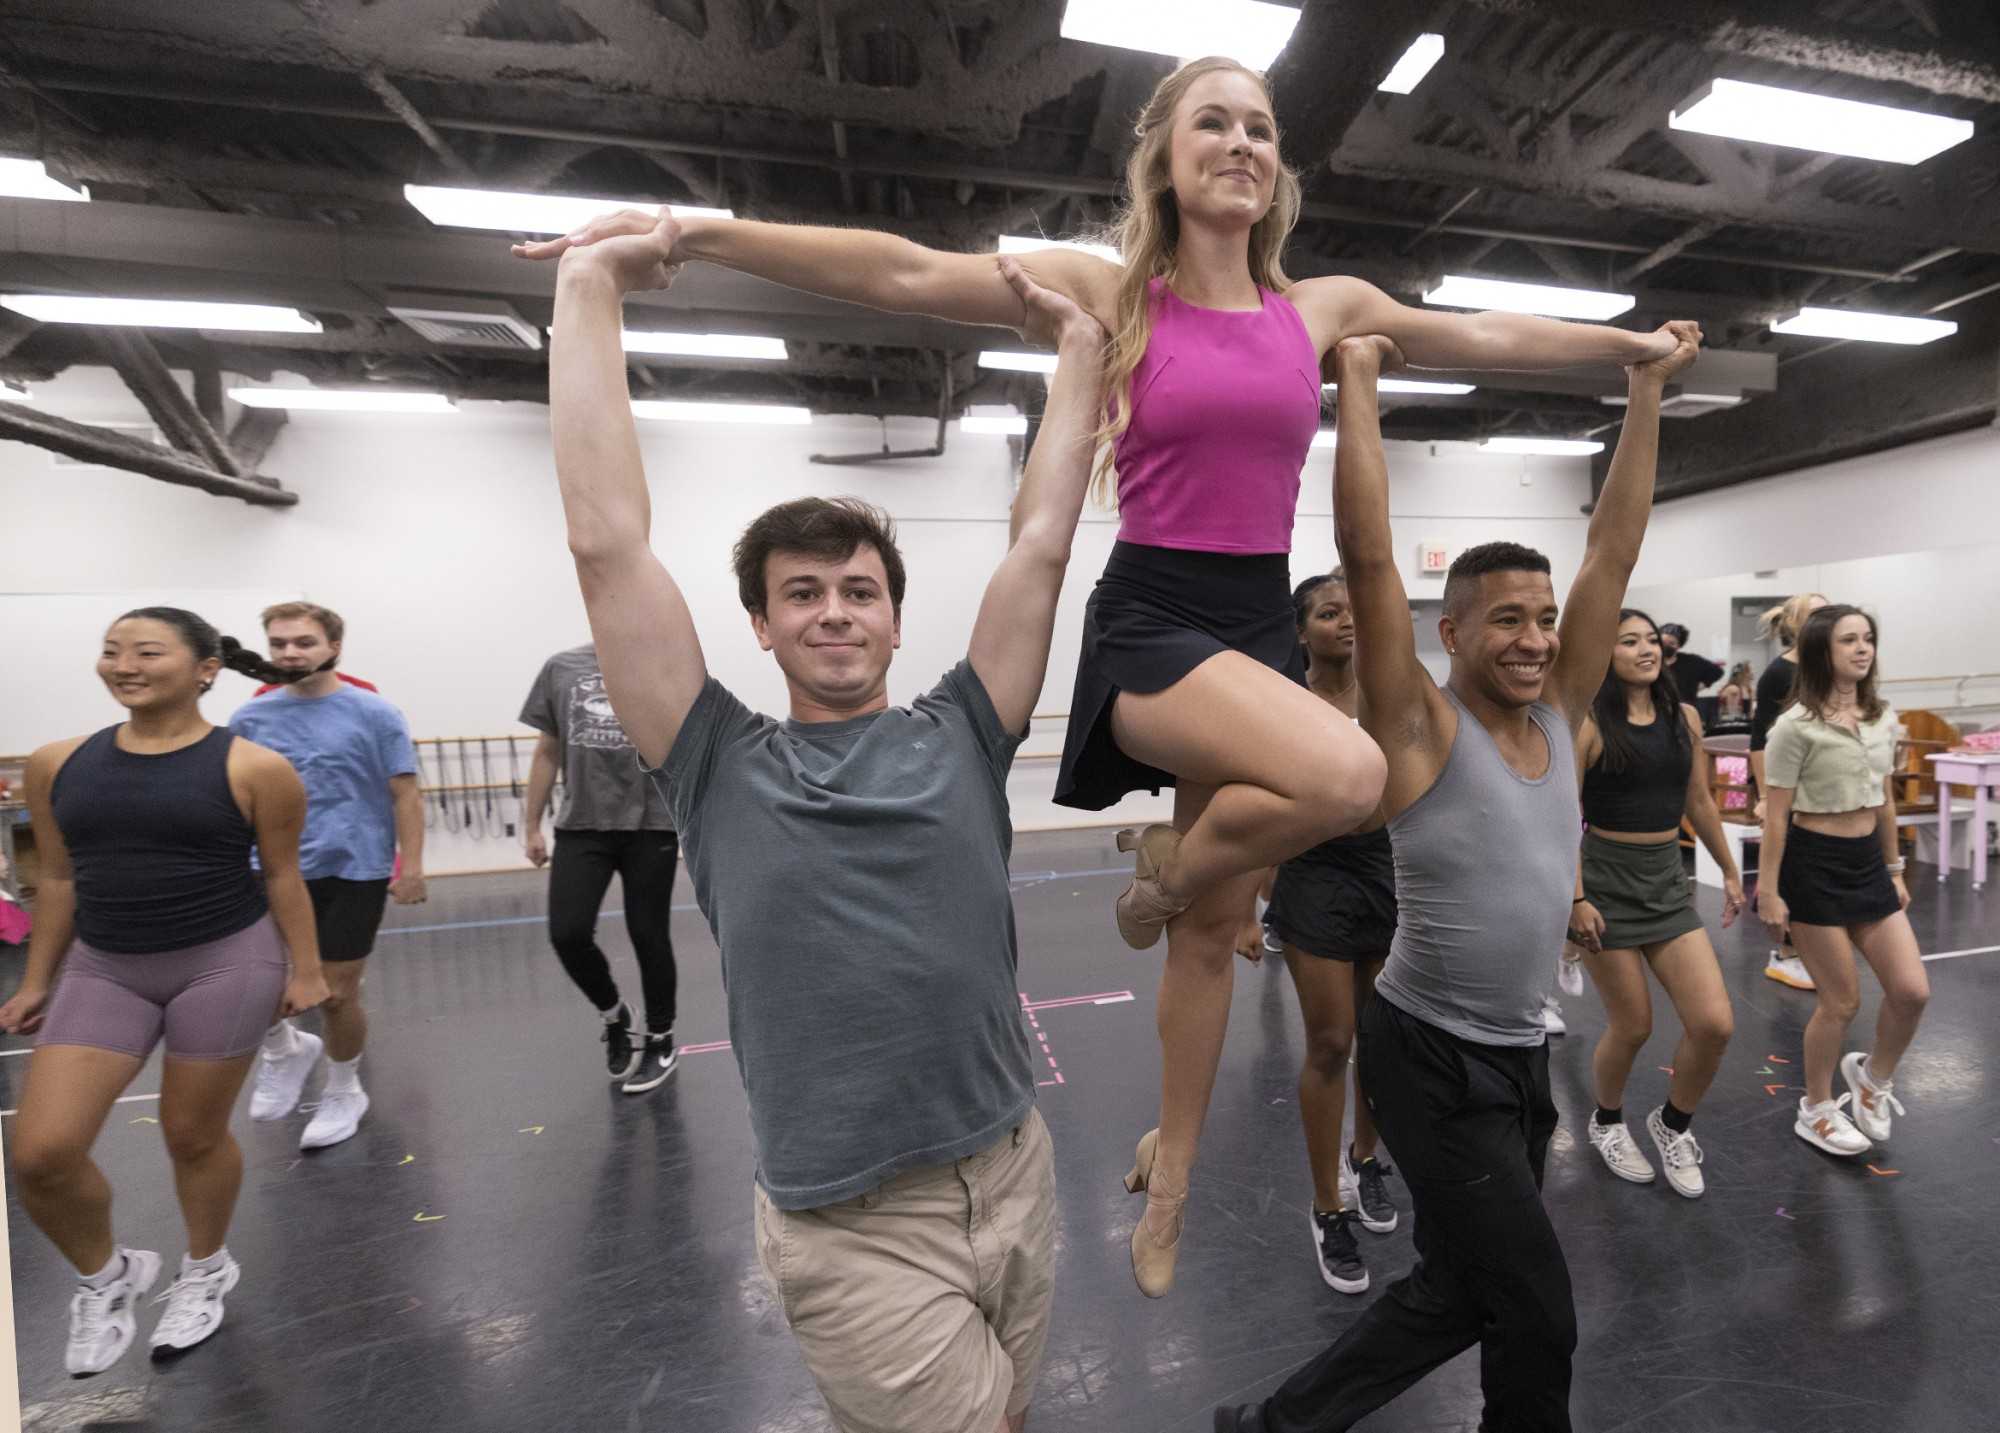 Lillie Langston (center) and cast members rehearsing their roles for “Legally Blonde the Musical” during a Designer Run rehearsal, Tuesday, Sept. 20, 2022. (Photo/Tim Fuller)